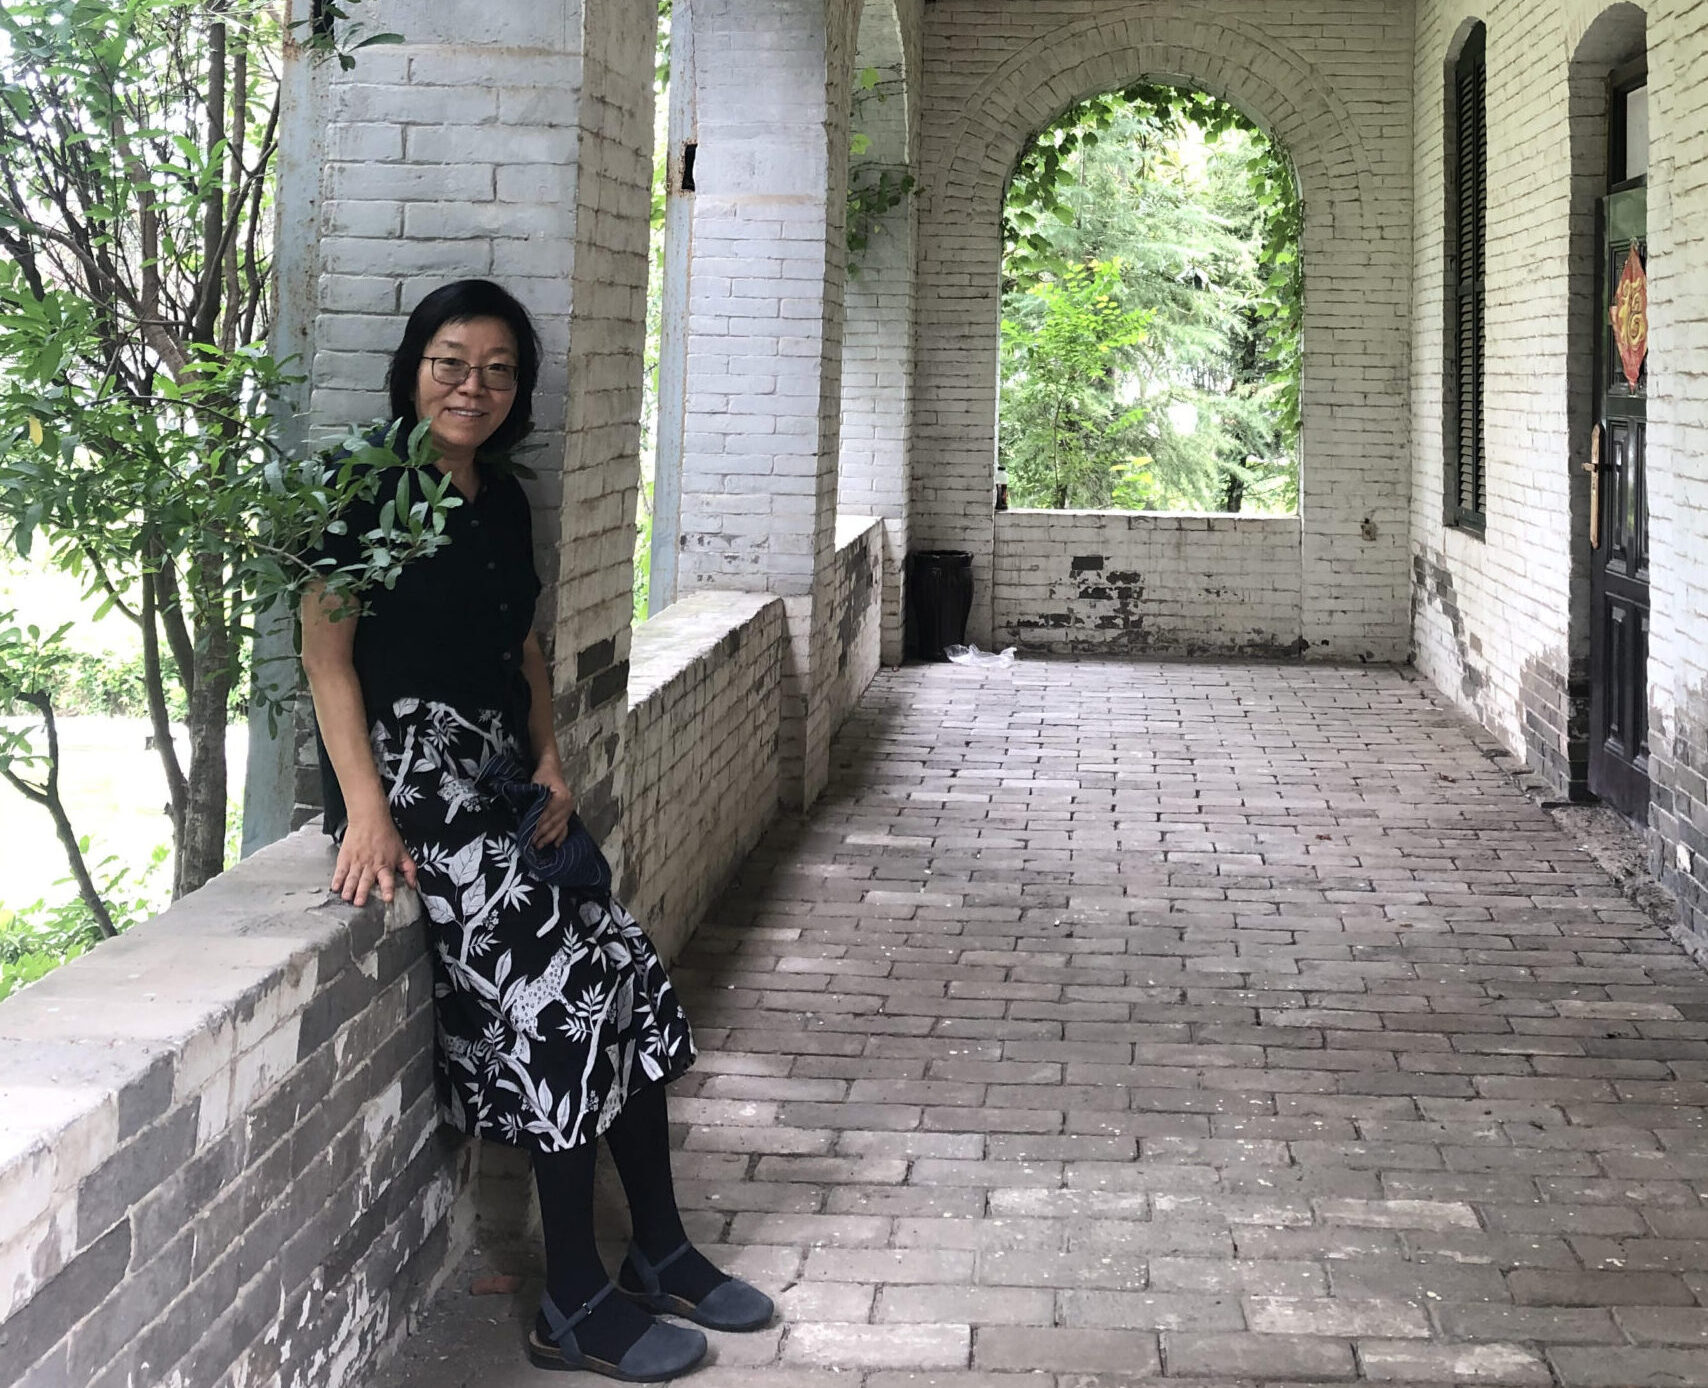 Hong Wang on the porch of the her childhood home, built by Canadian missionaries.